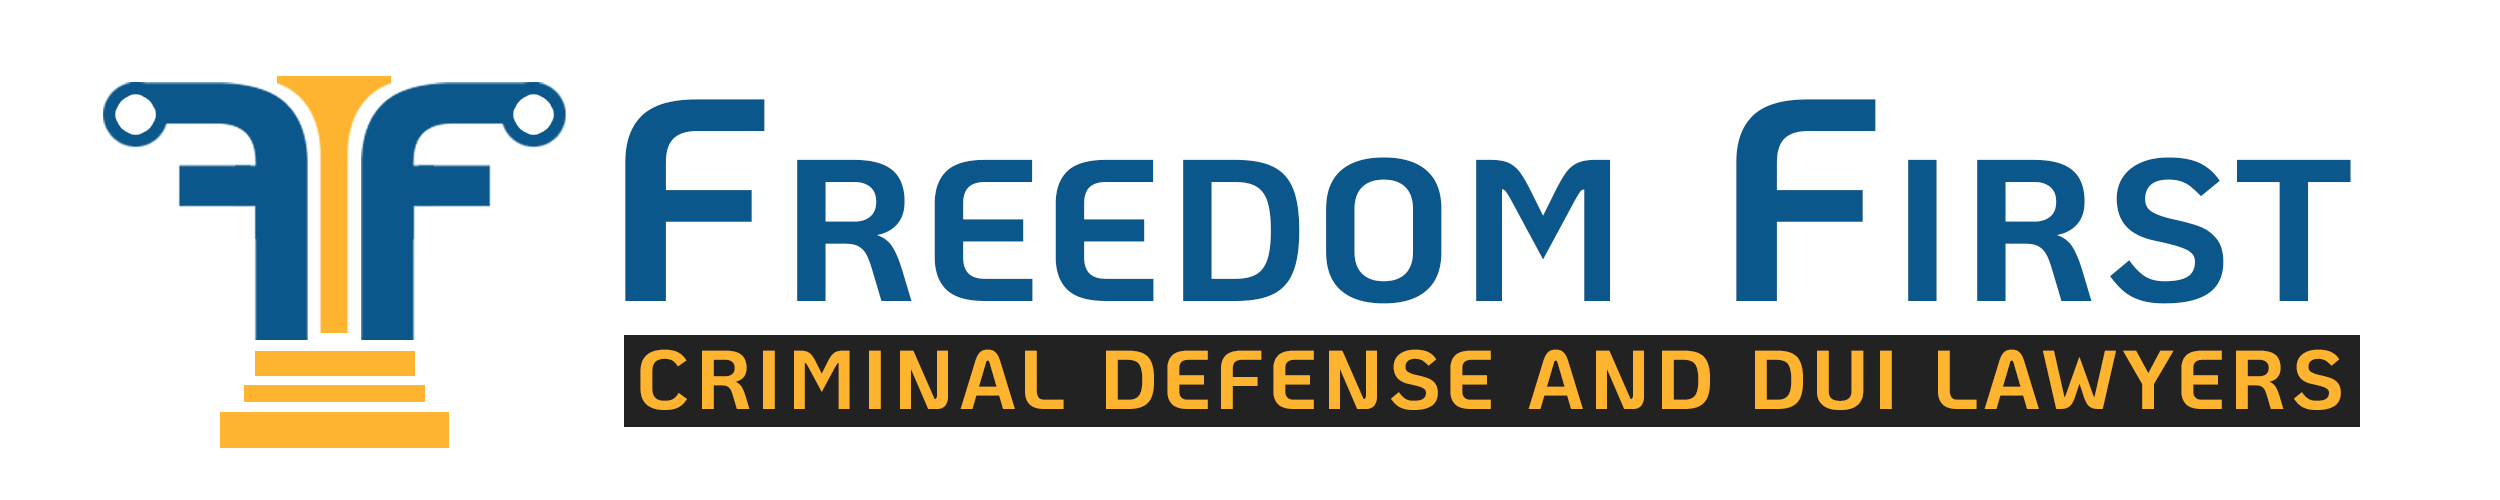 Freedom-First-Criminal-Defense-and-DUI-Lawyers-Logo.jpg